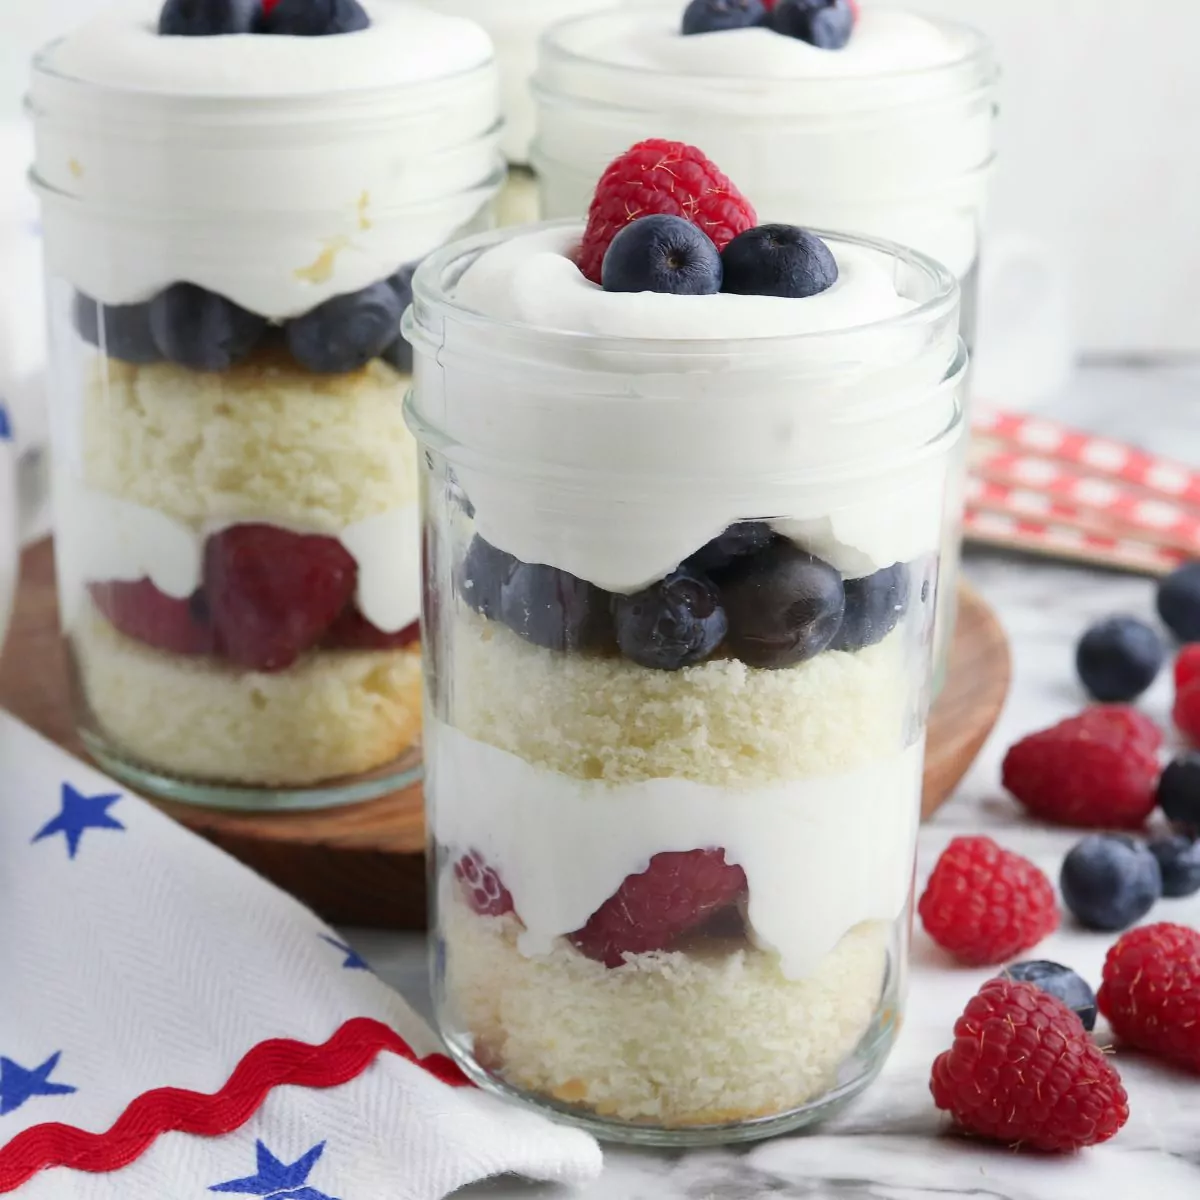 3 glass jars filled with a pound cake, whipped cream and berry dessert.